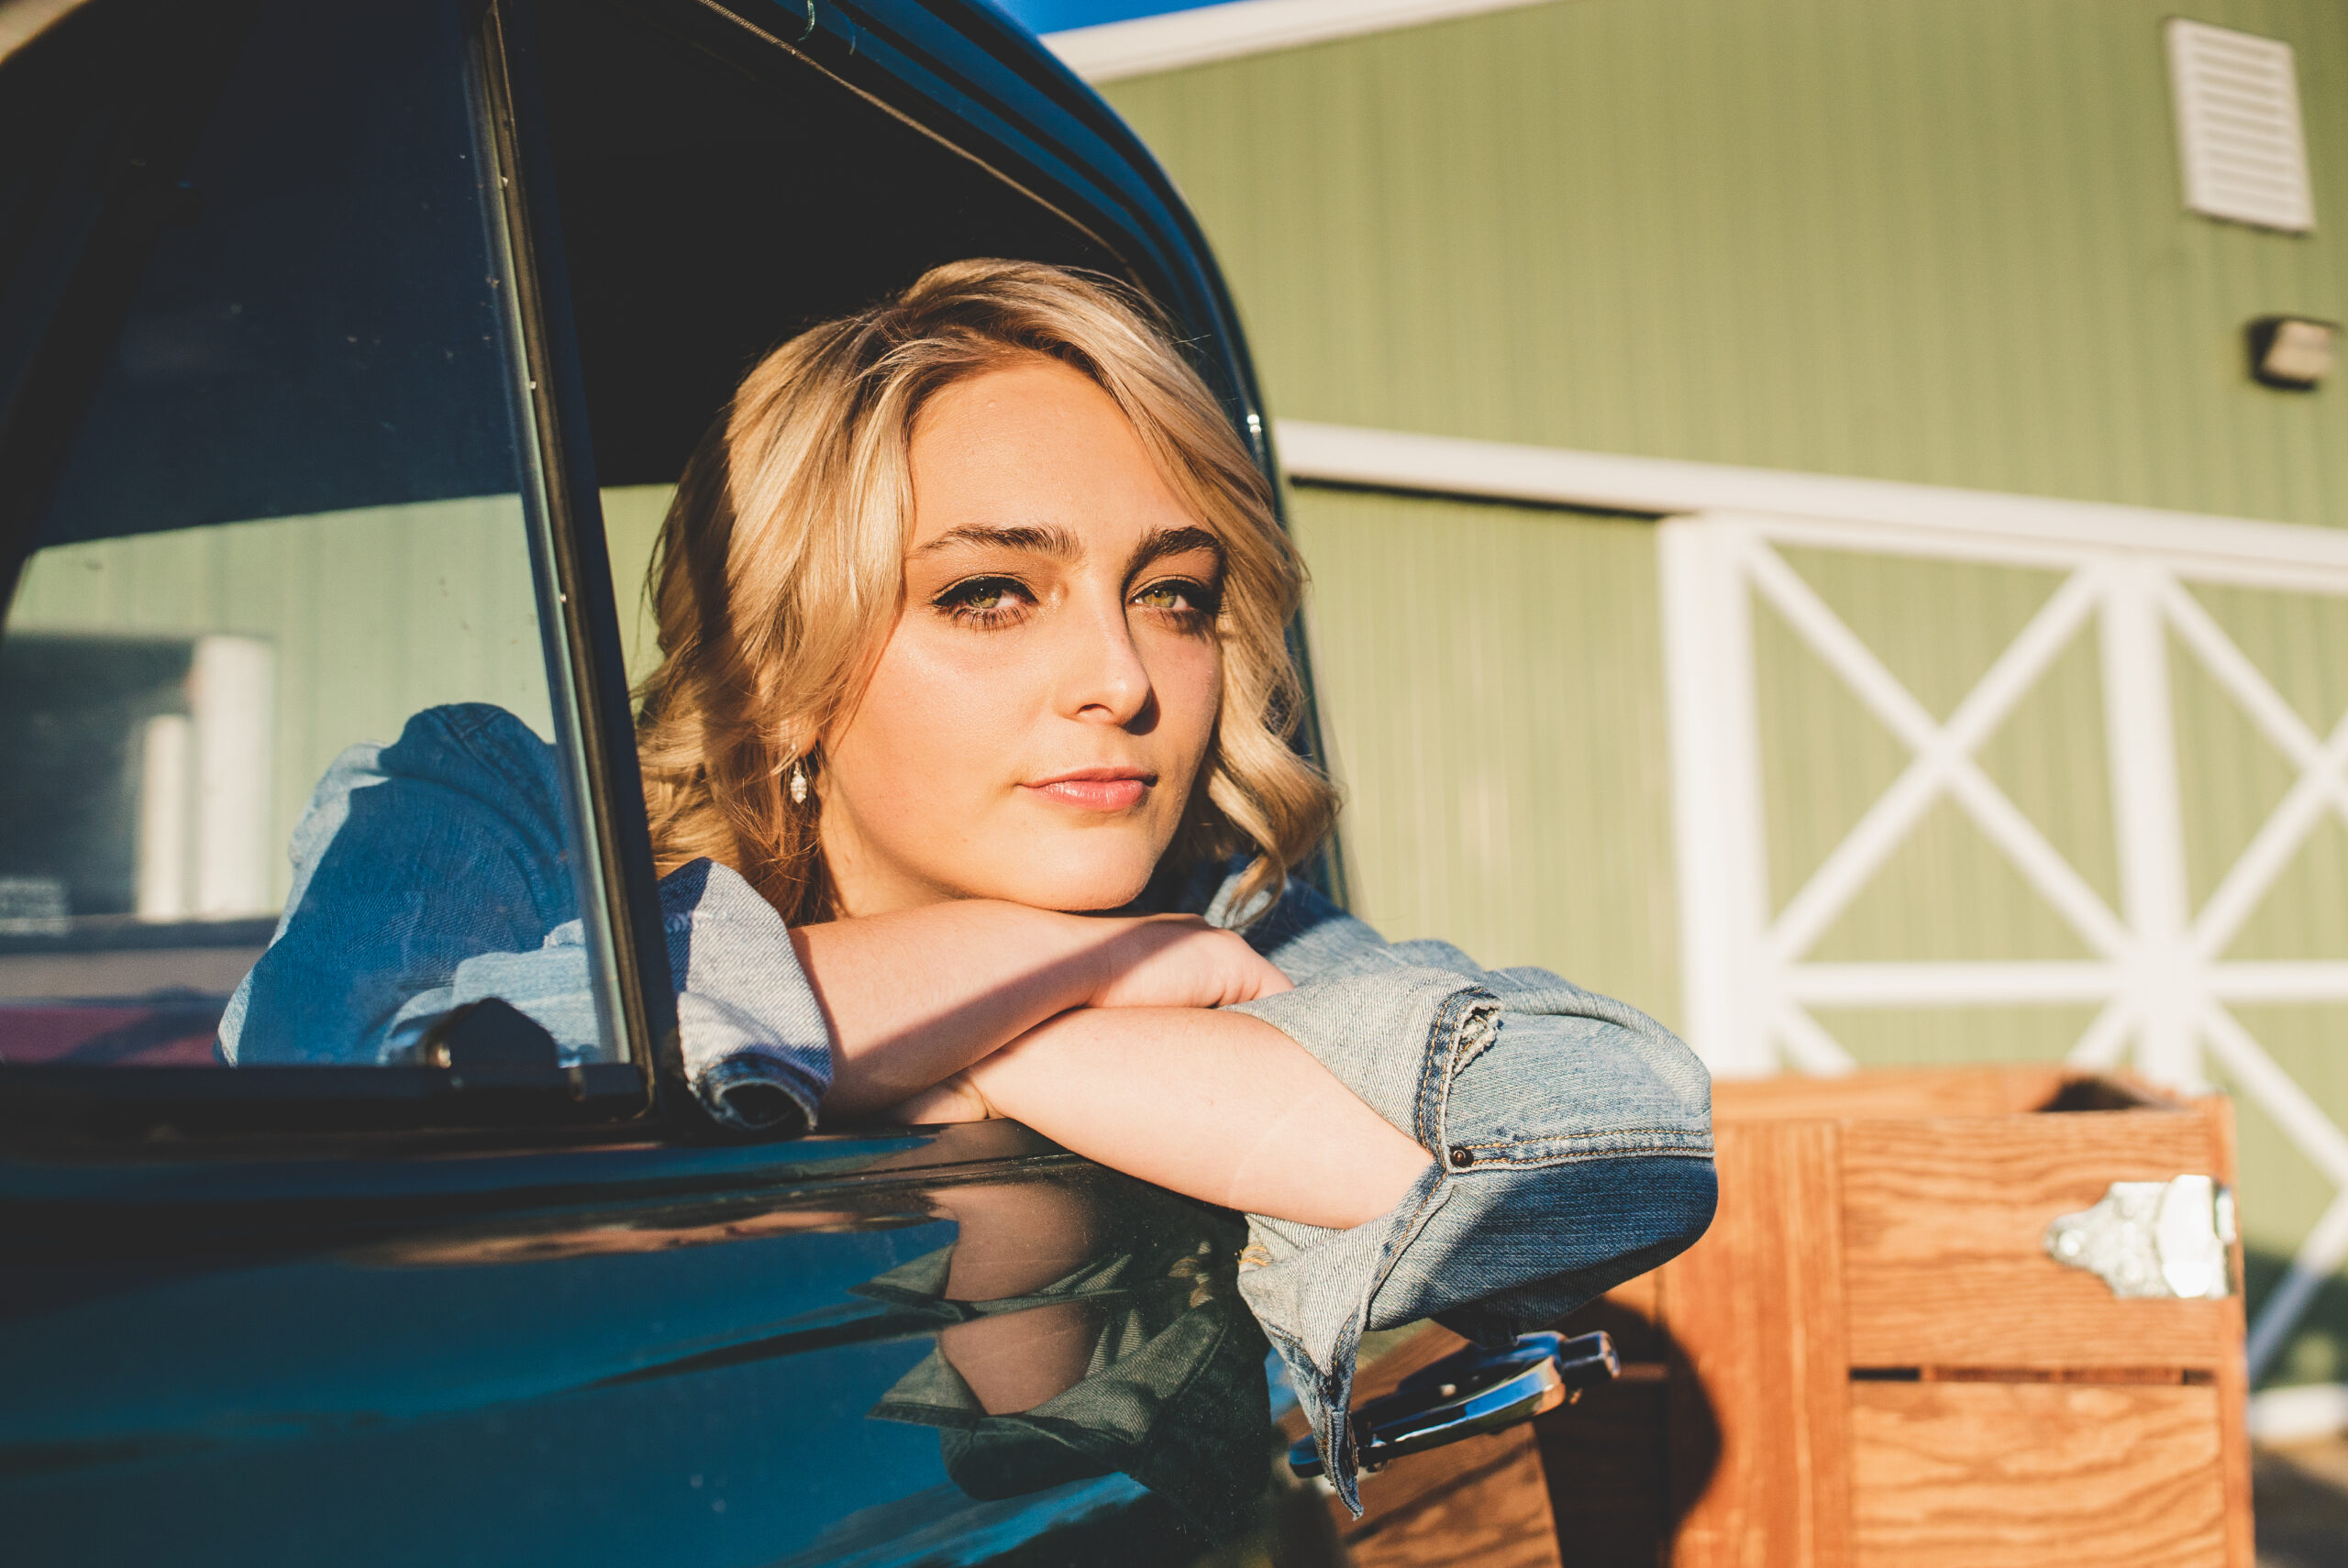 “American Idol” Runner-Up HunterGirl Releases Her First Single Since Being on the Show, Which Doubles as a ‘Thank You Card’ to her Hometown (Exclusive)